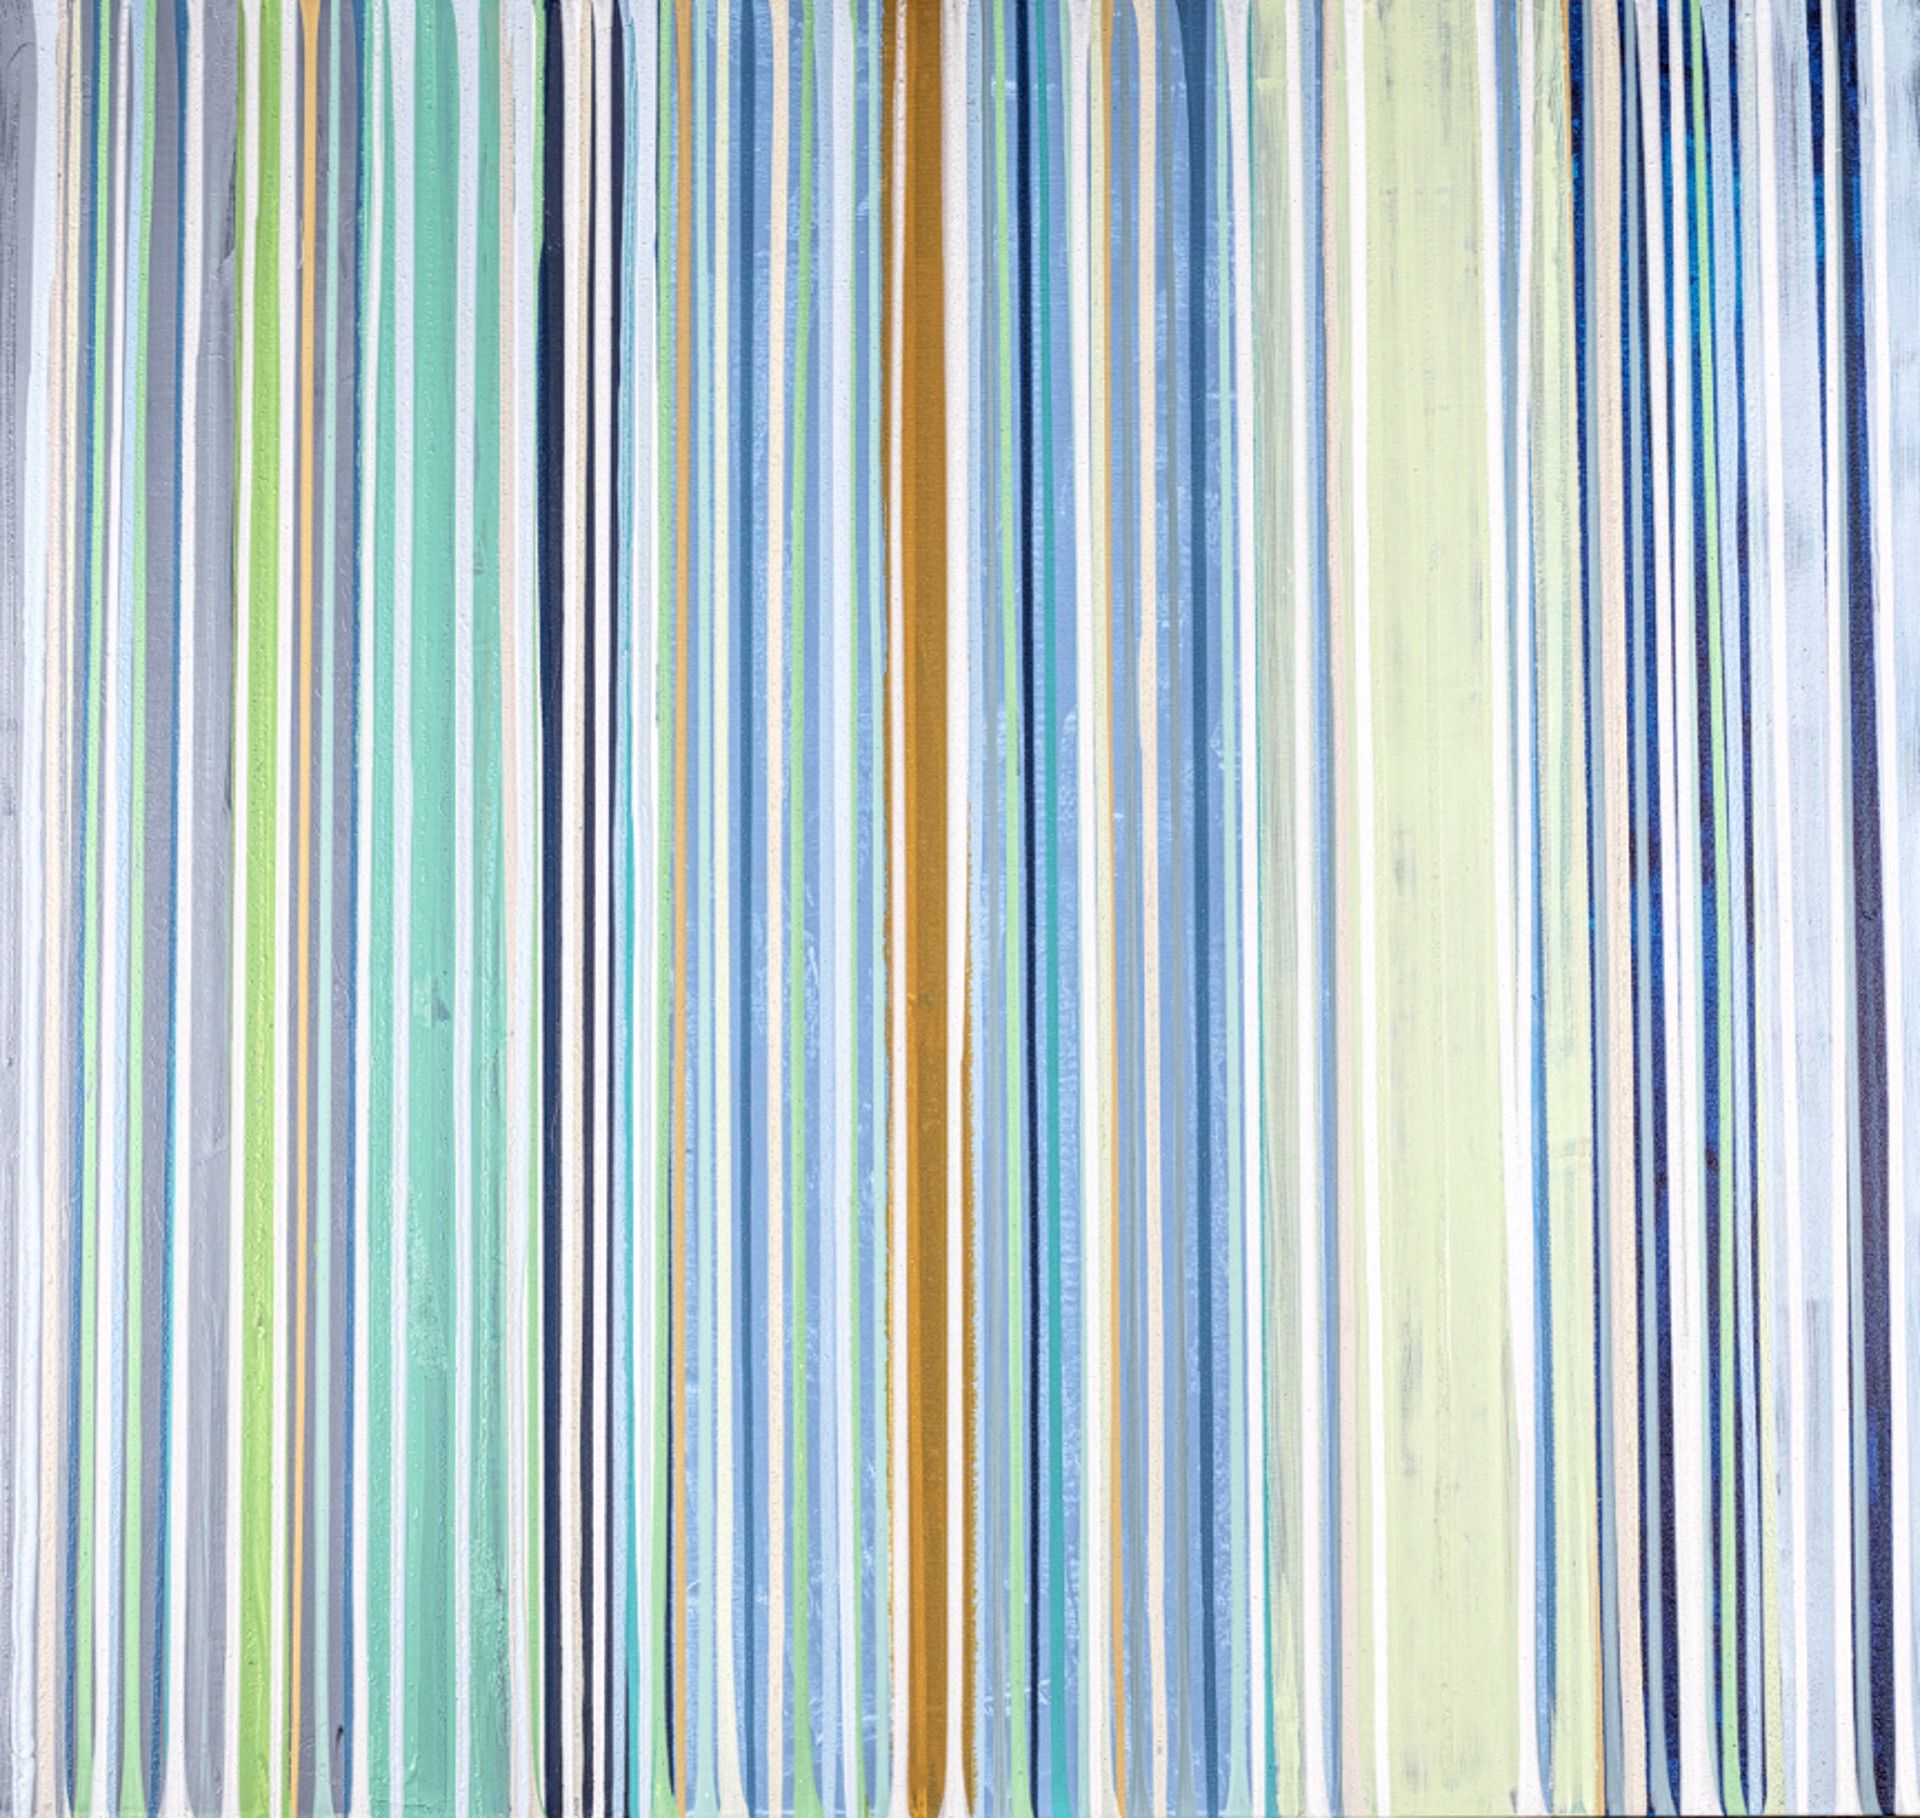 Linea 58, an abstract painting with blue, green, and yellow stripes by John Schuyler.